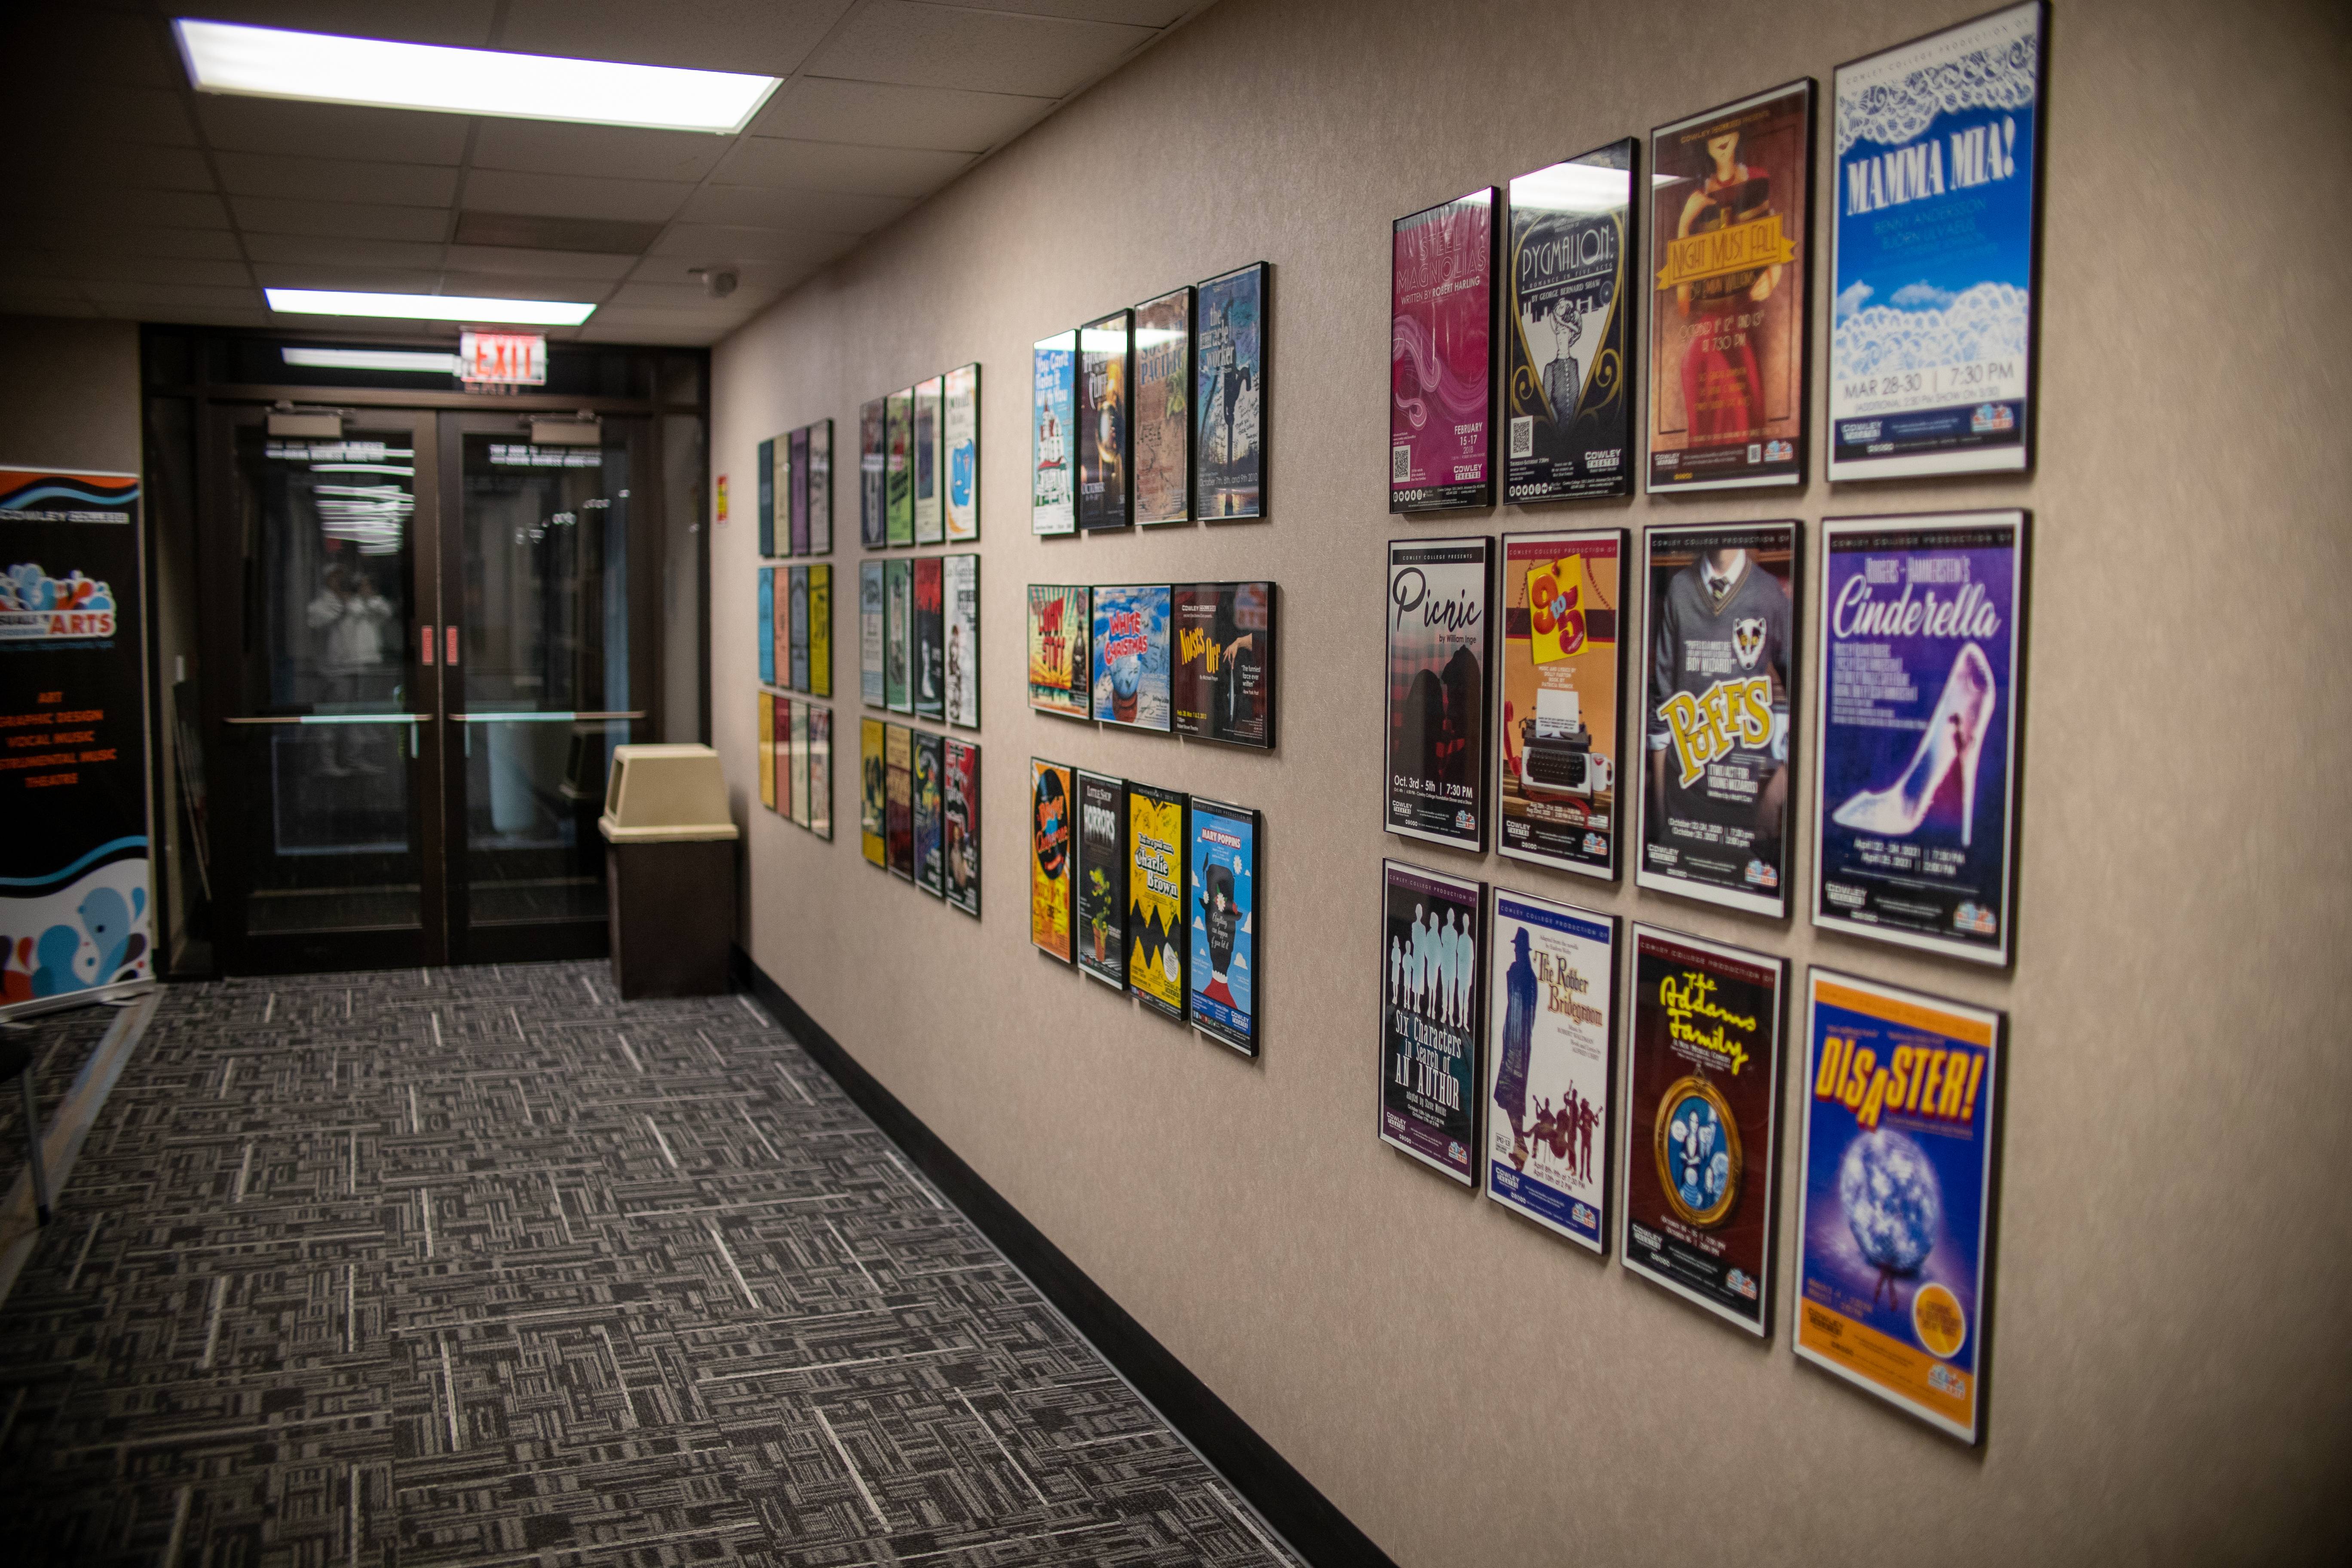 hallway with show posters